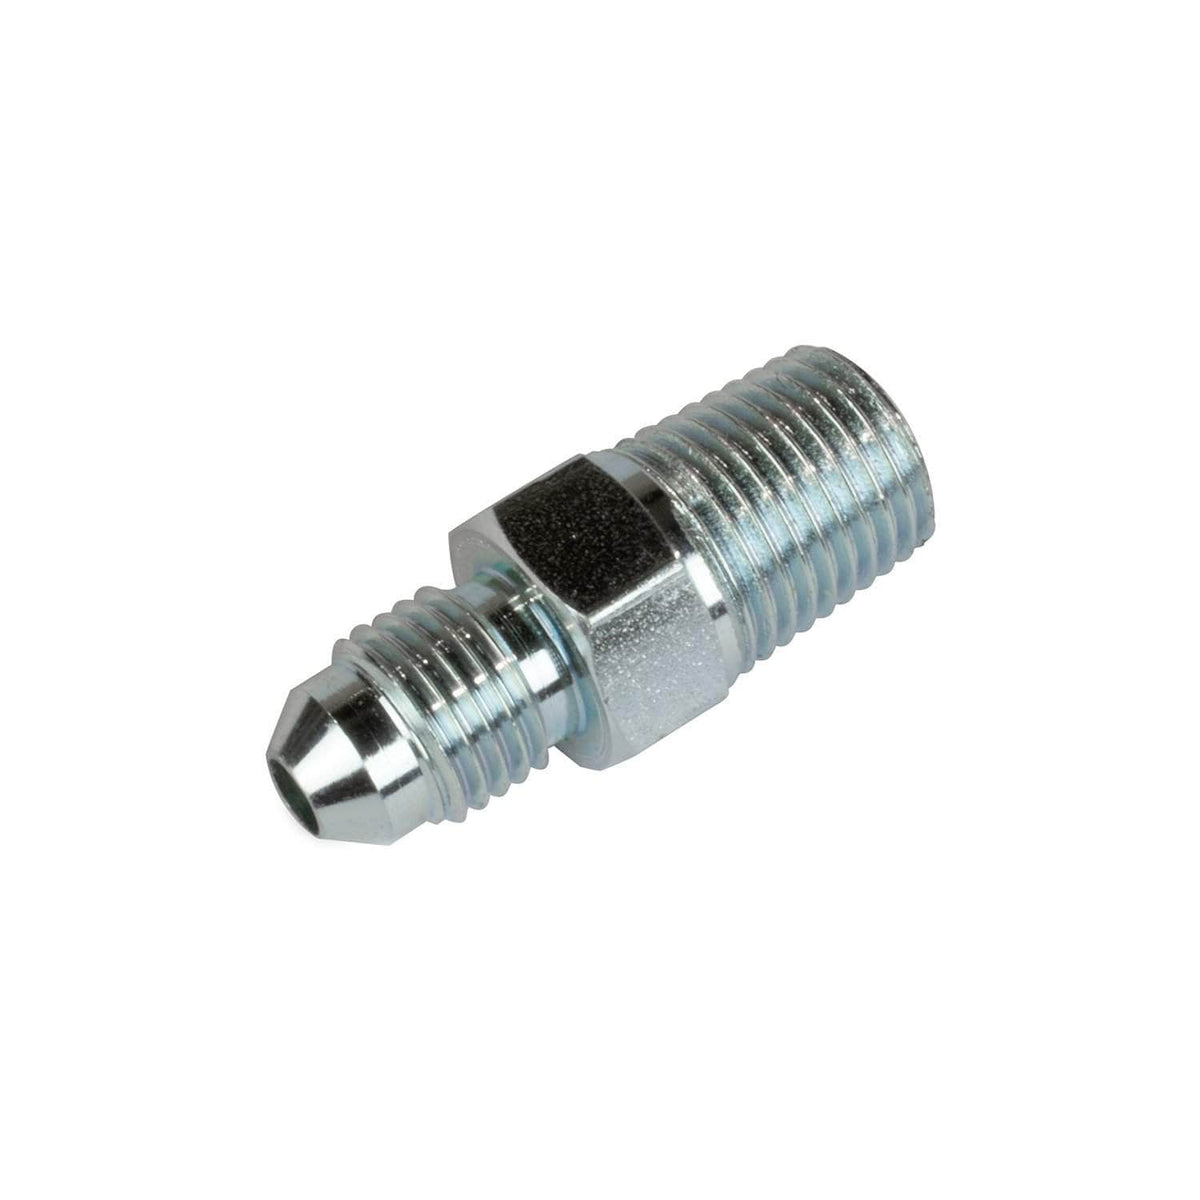 Flared 1/4&quot; x 6mm straight connector for use with oil Aga range cookers with Deep Well burners